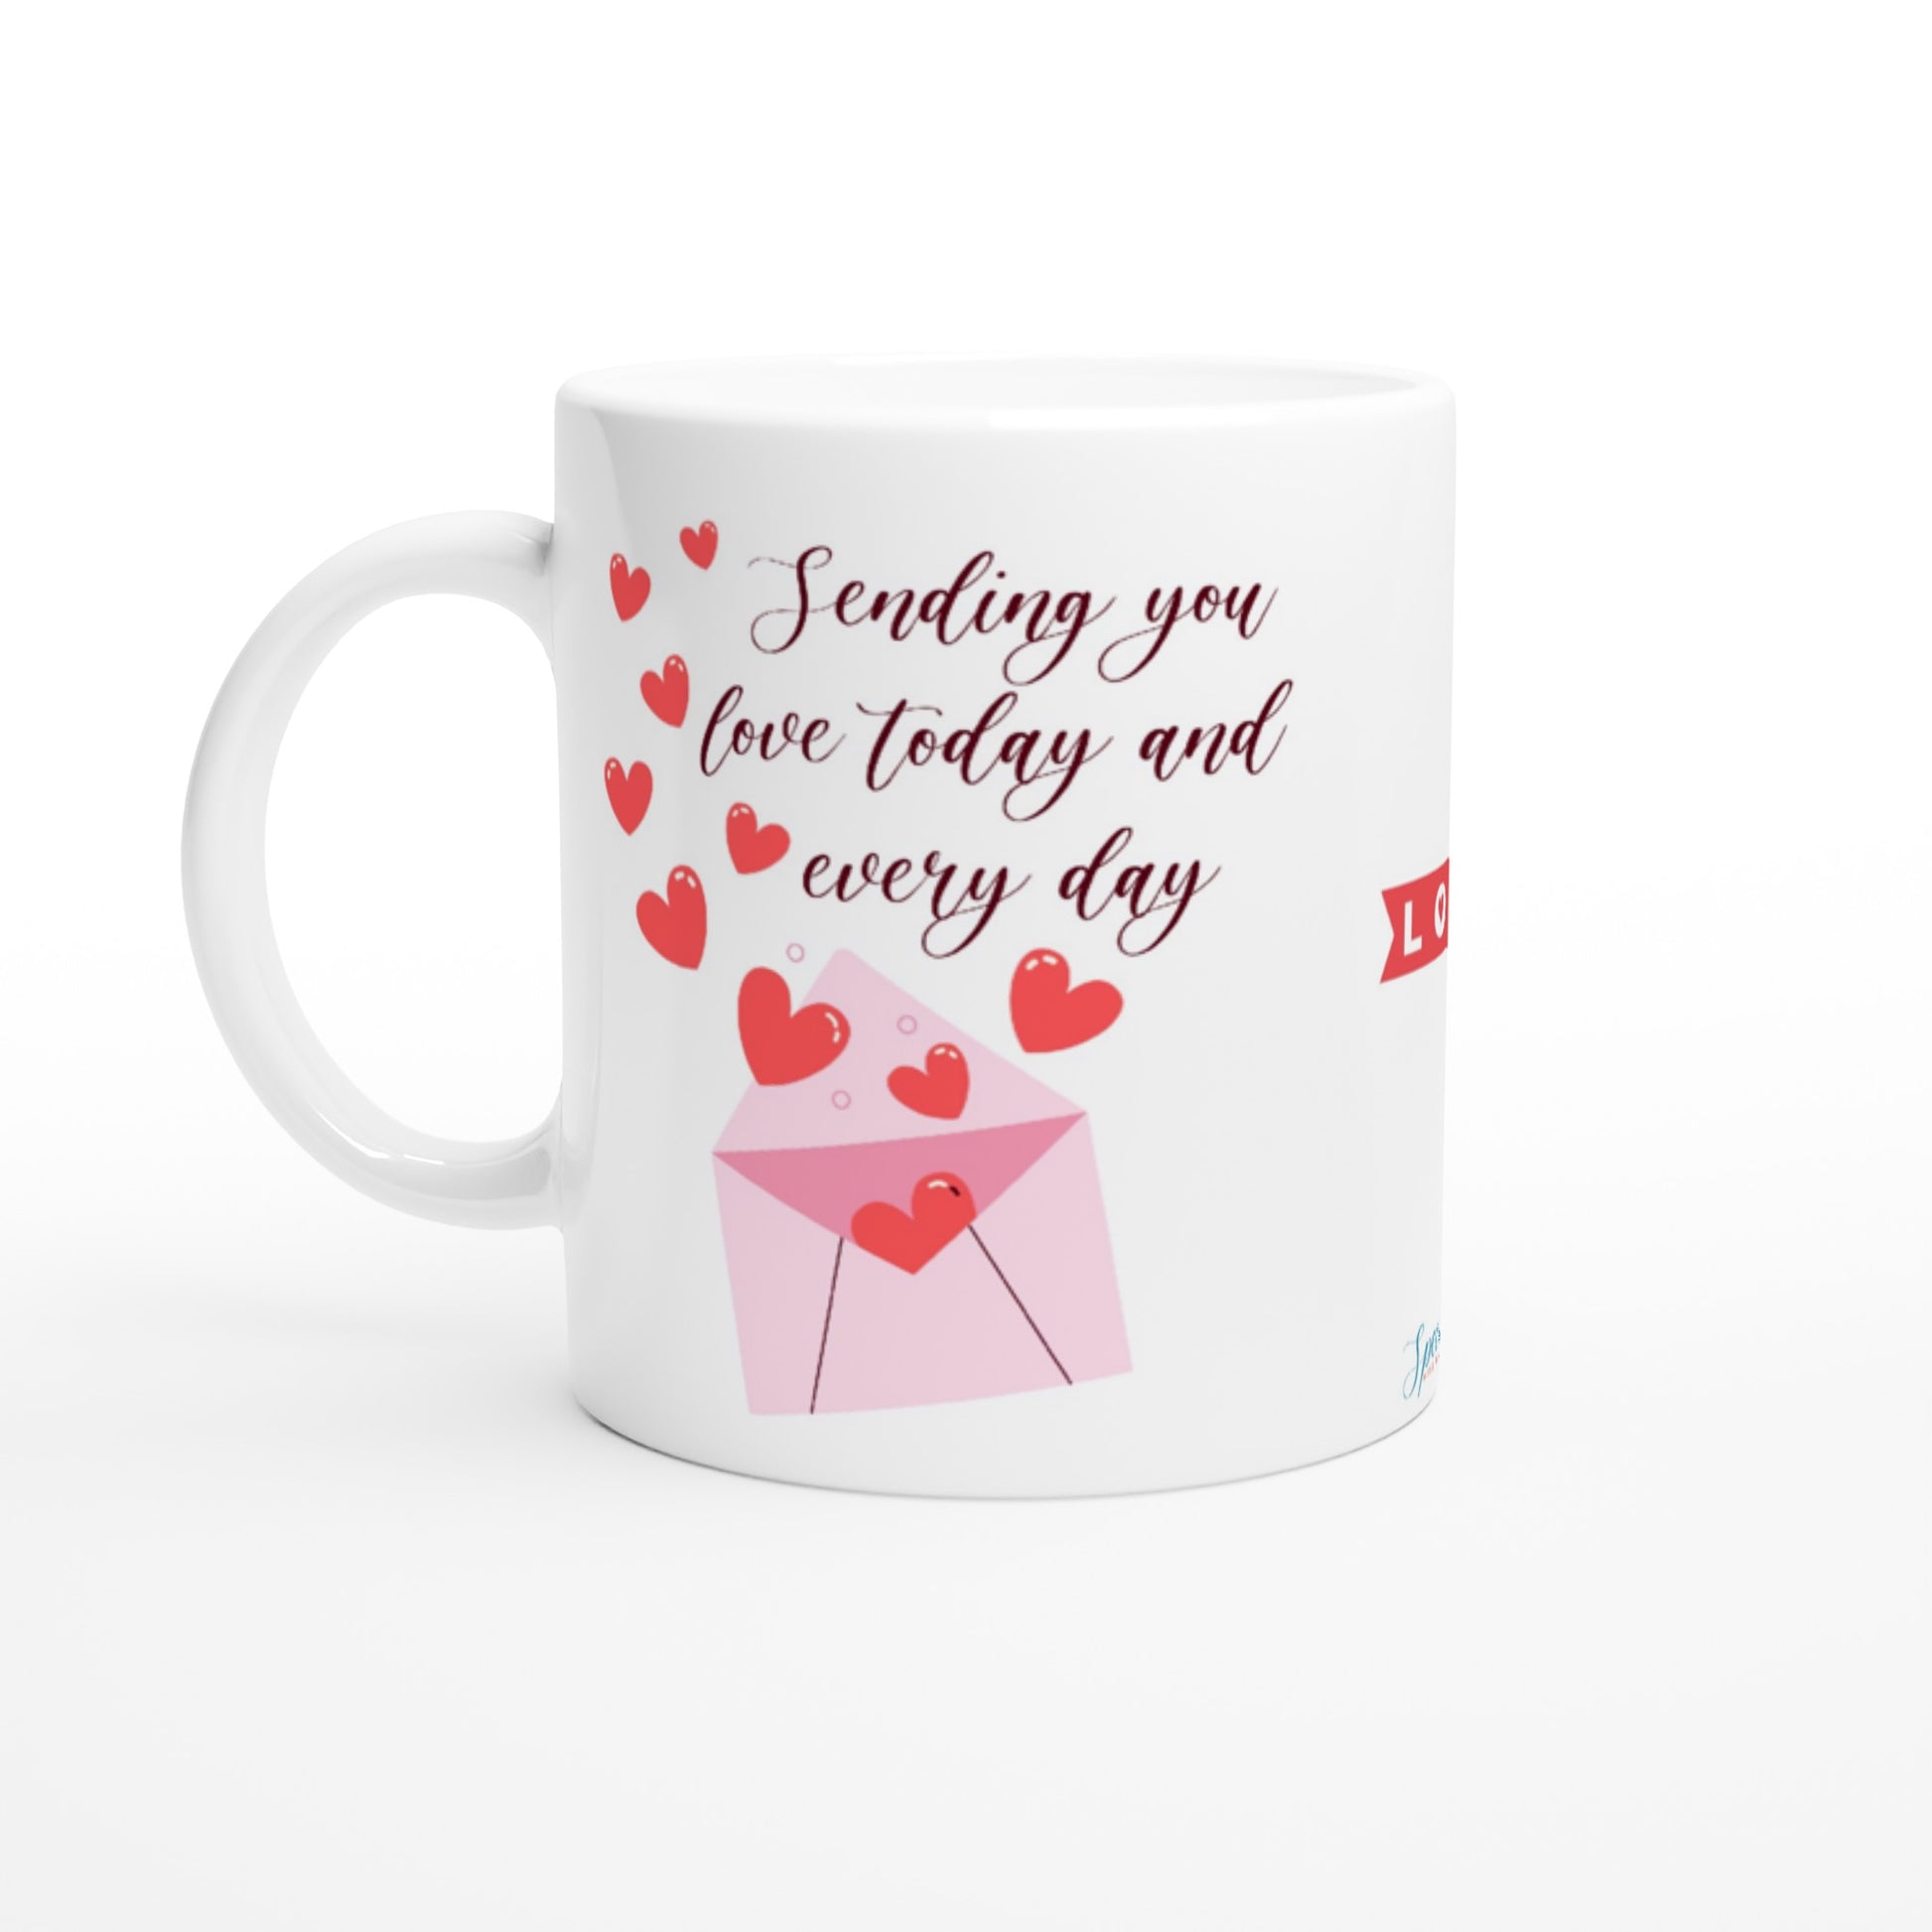 "Sending you love today and everyday" Customizable Photo 11 oz. Mug front view